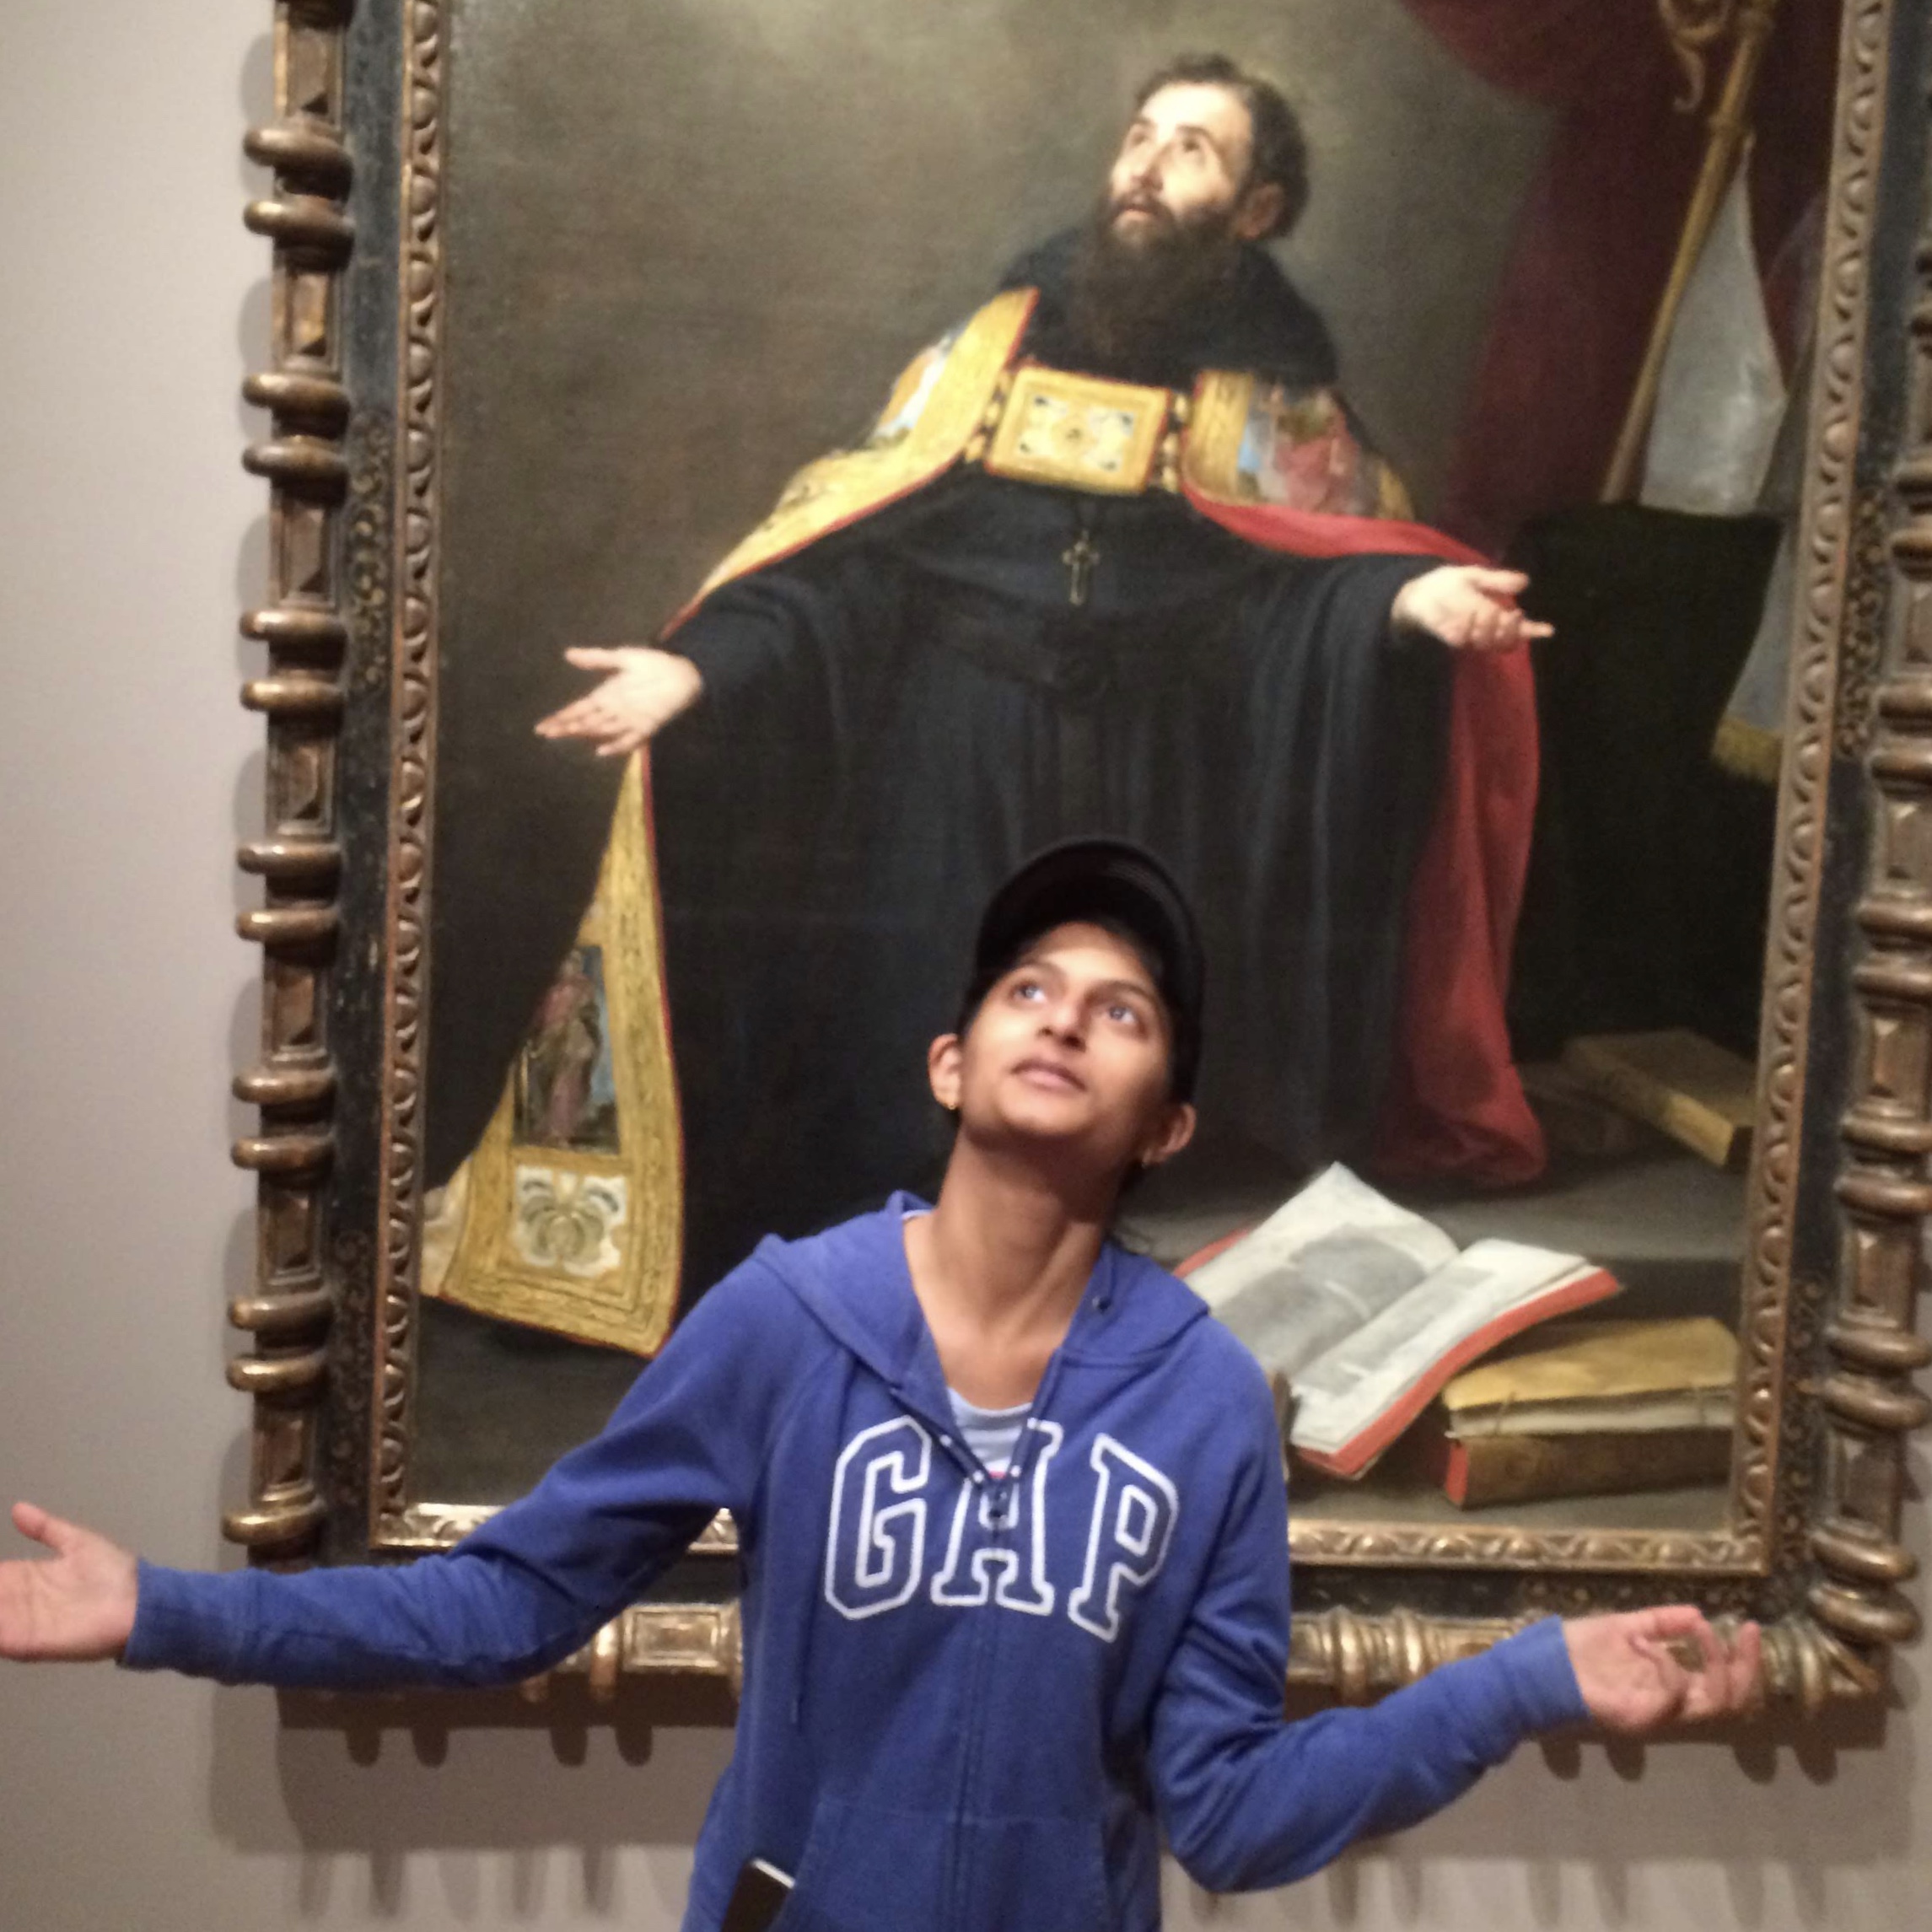 A medium brown skinned woman wearing a royal blue hoodie and a black hat with her arms out and looking upward in a questionable manner, mimicking a pose in the art piece directly behind her.